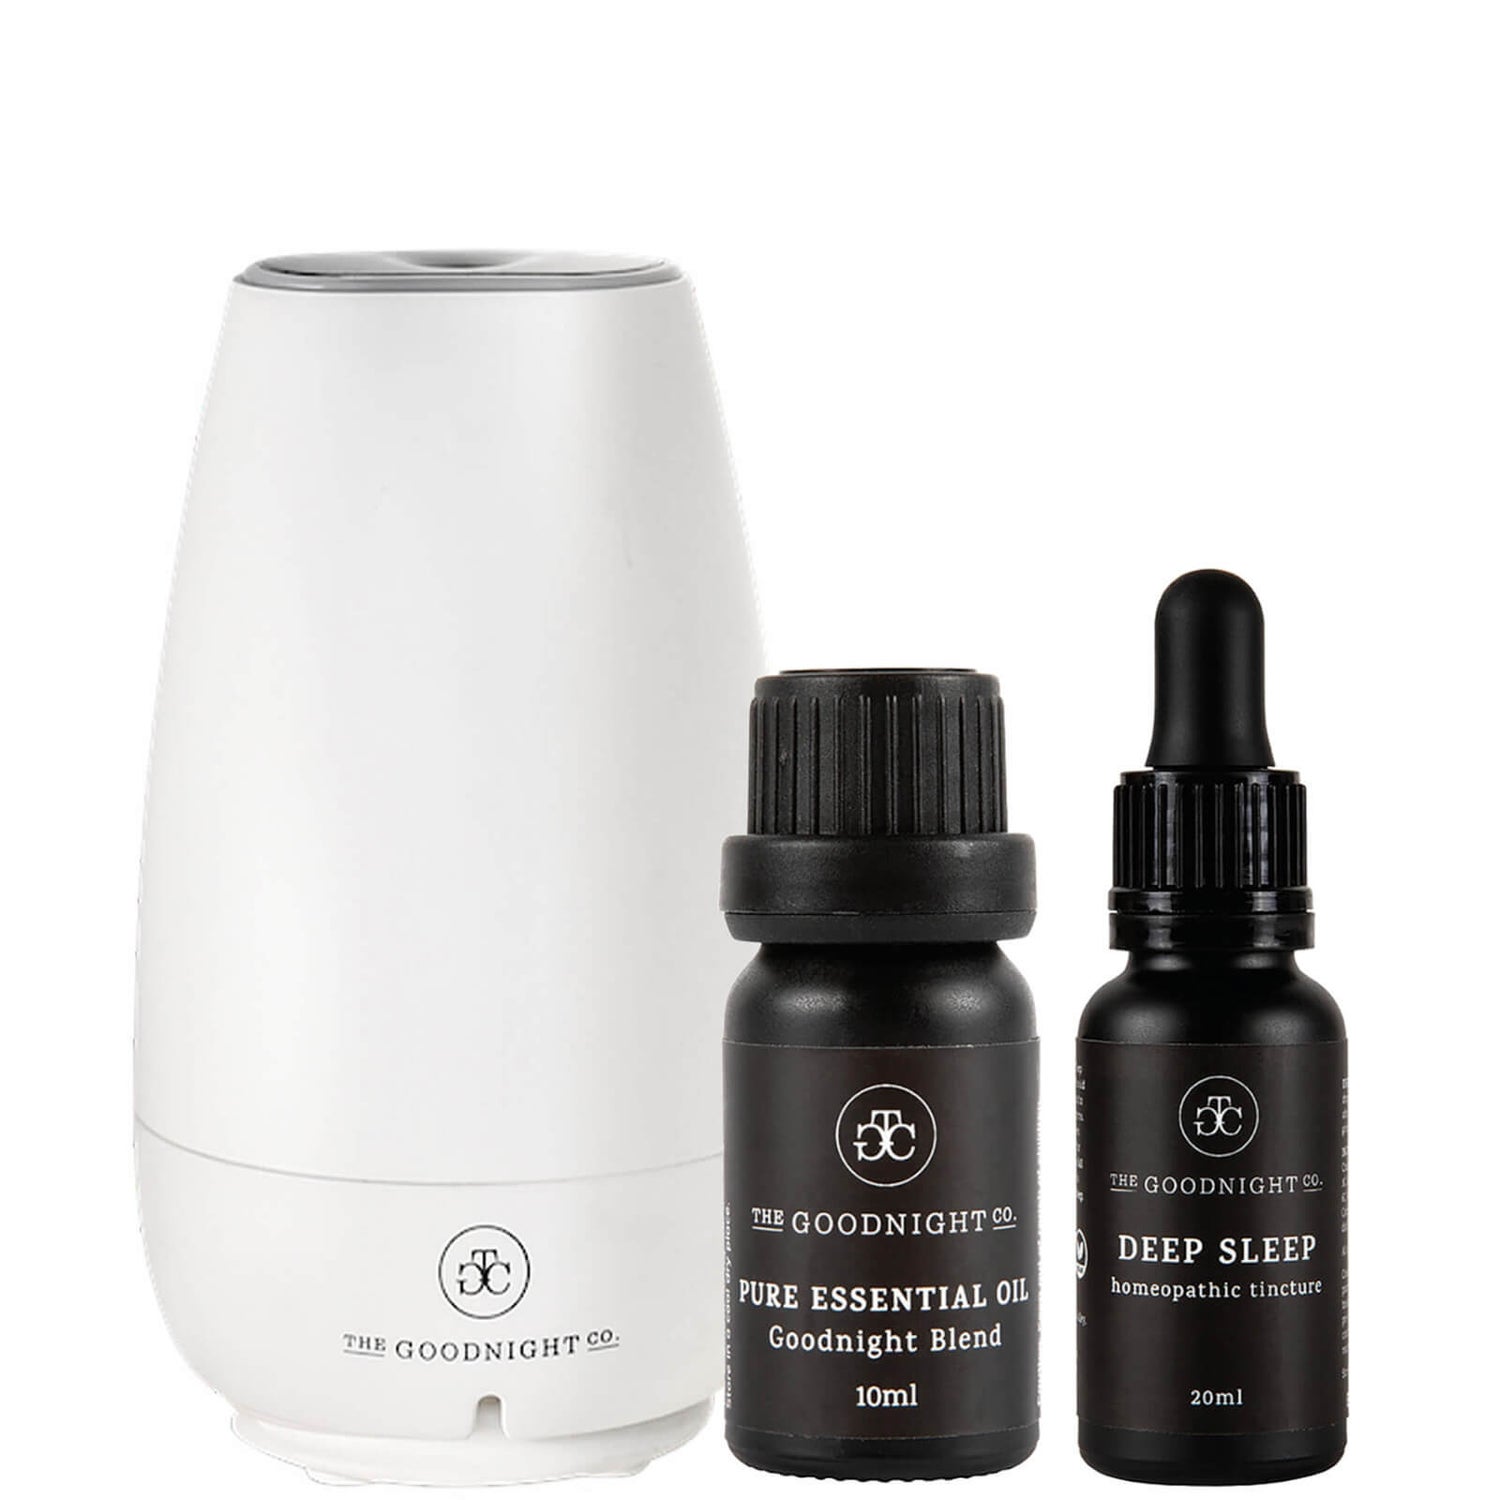 The Goodnight Co. Diffuser and Deep Sleep Kit - Ceramic White (Worth $140.00)